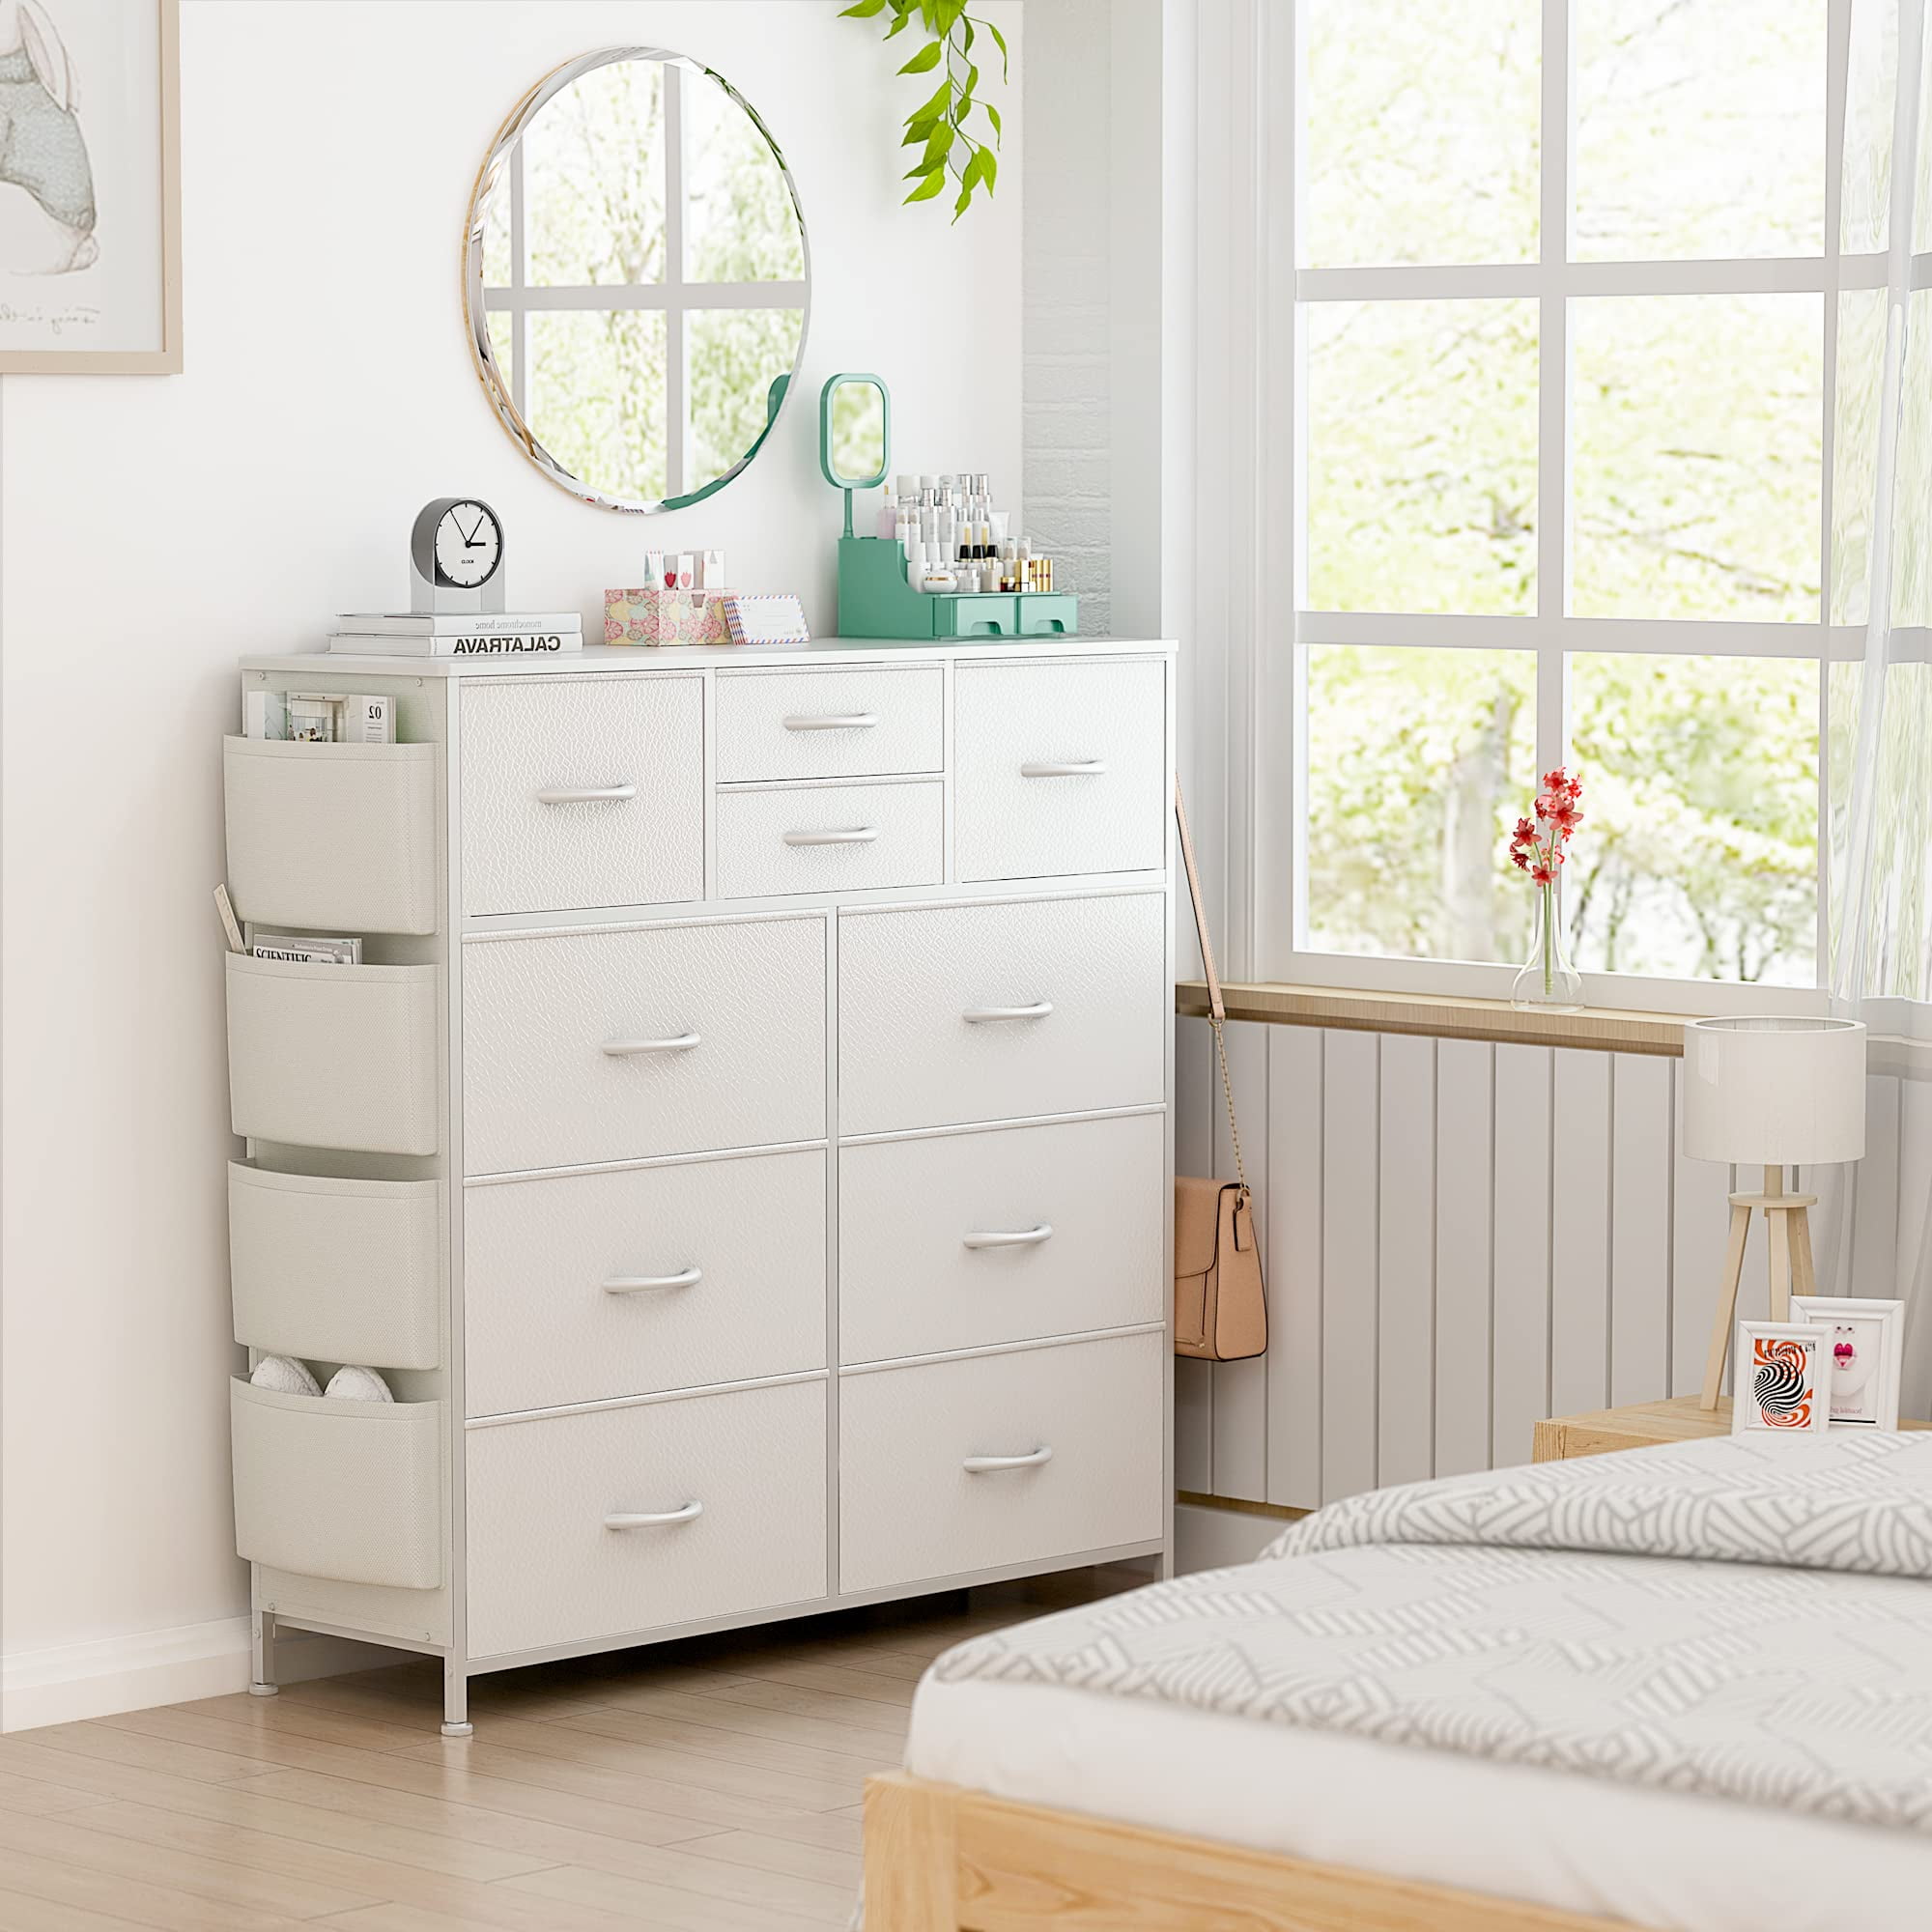 Lulive 10 Drawer Dresser, Chest of Drawers for Bedroom with Side